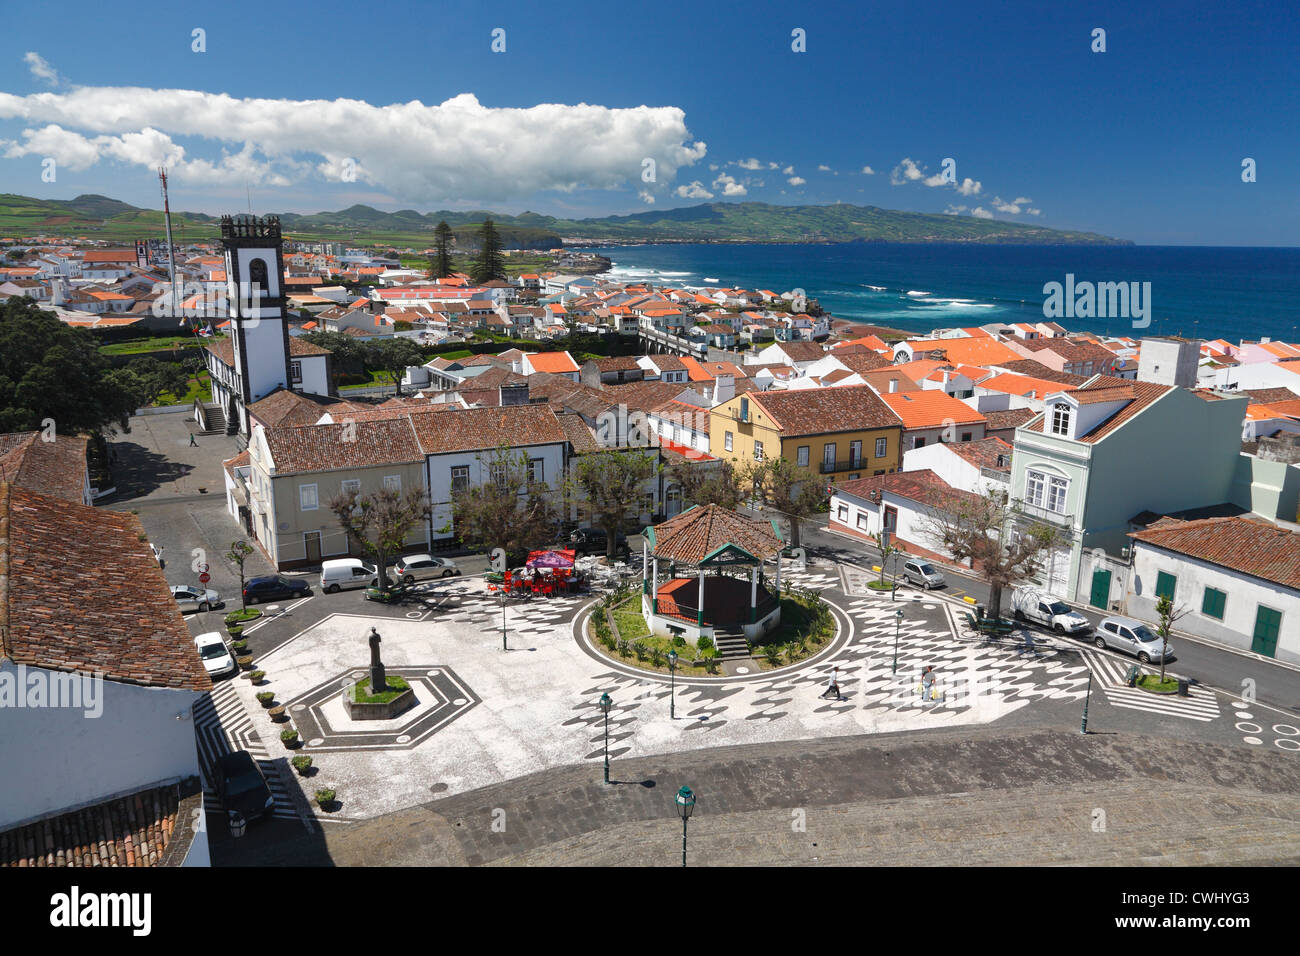 The city of Ribeira Grande on the island of Sao Miguel, Azores islands, Portugal Stock Photo